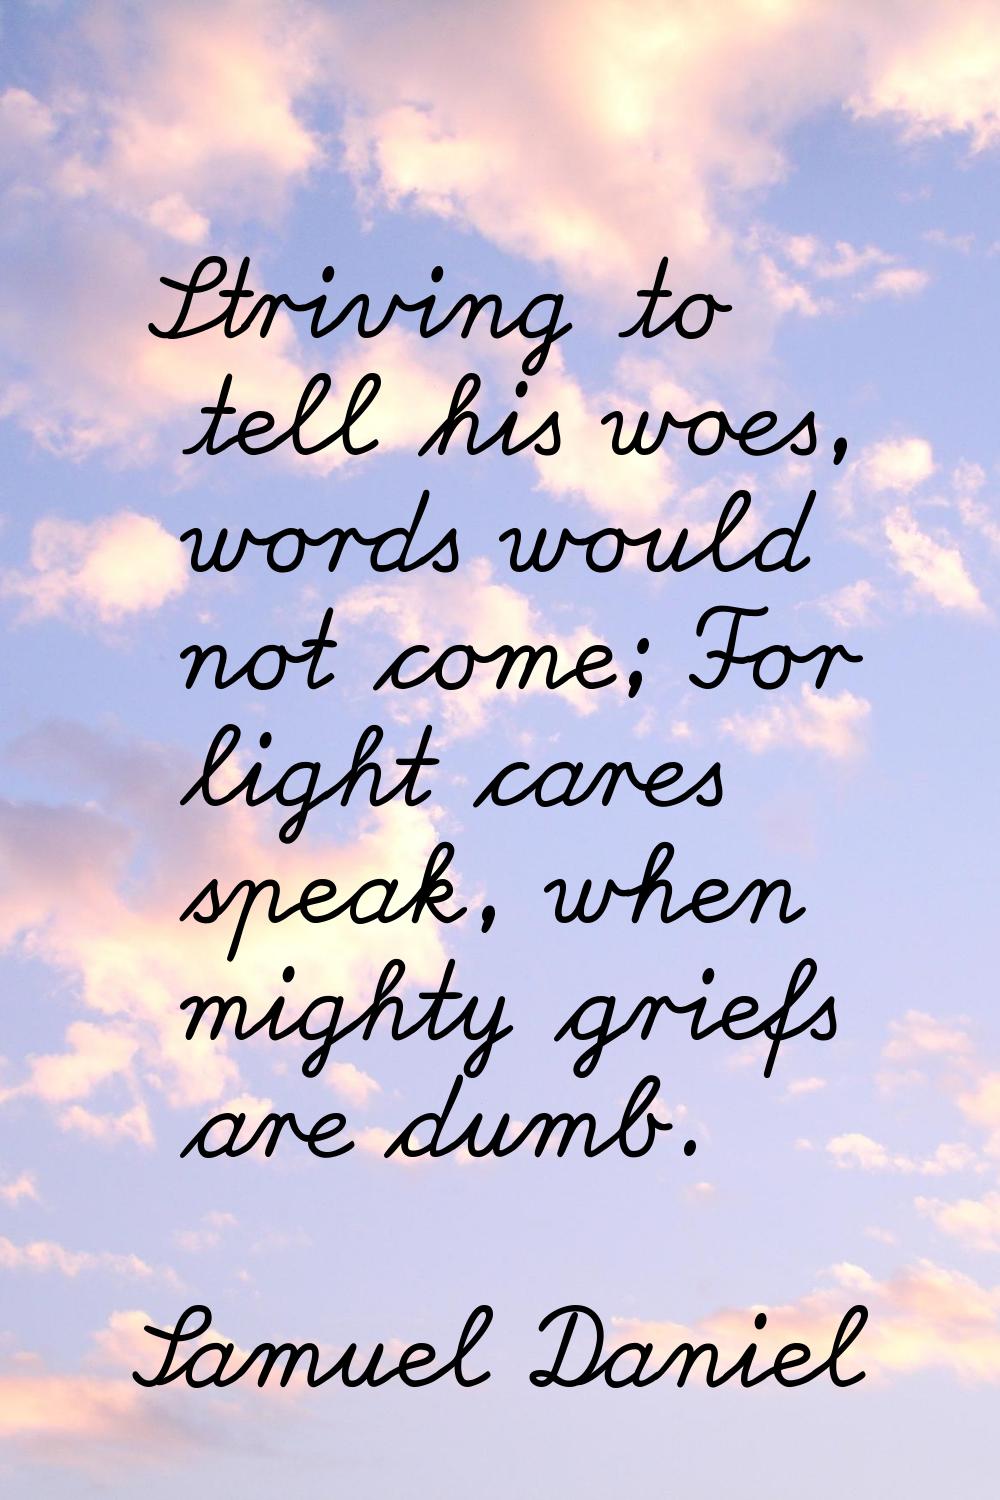 Striving to tell his woes, words would not come; For light cares speak, when mighty griefs are dumb